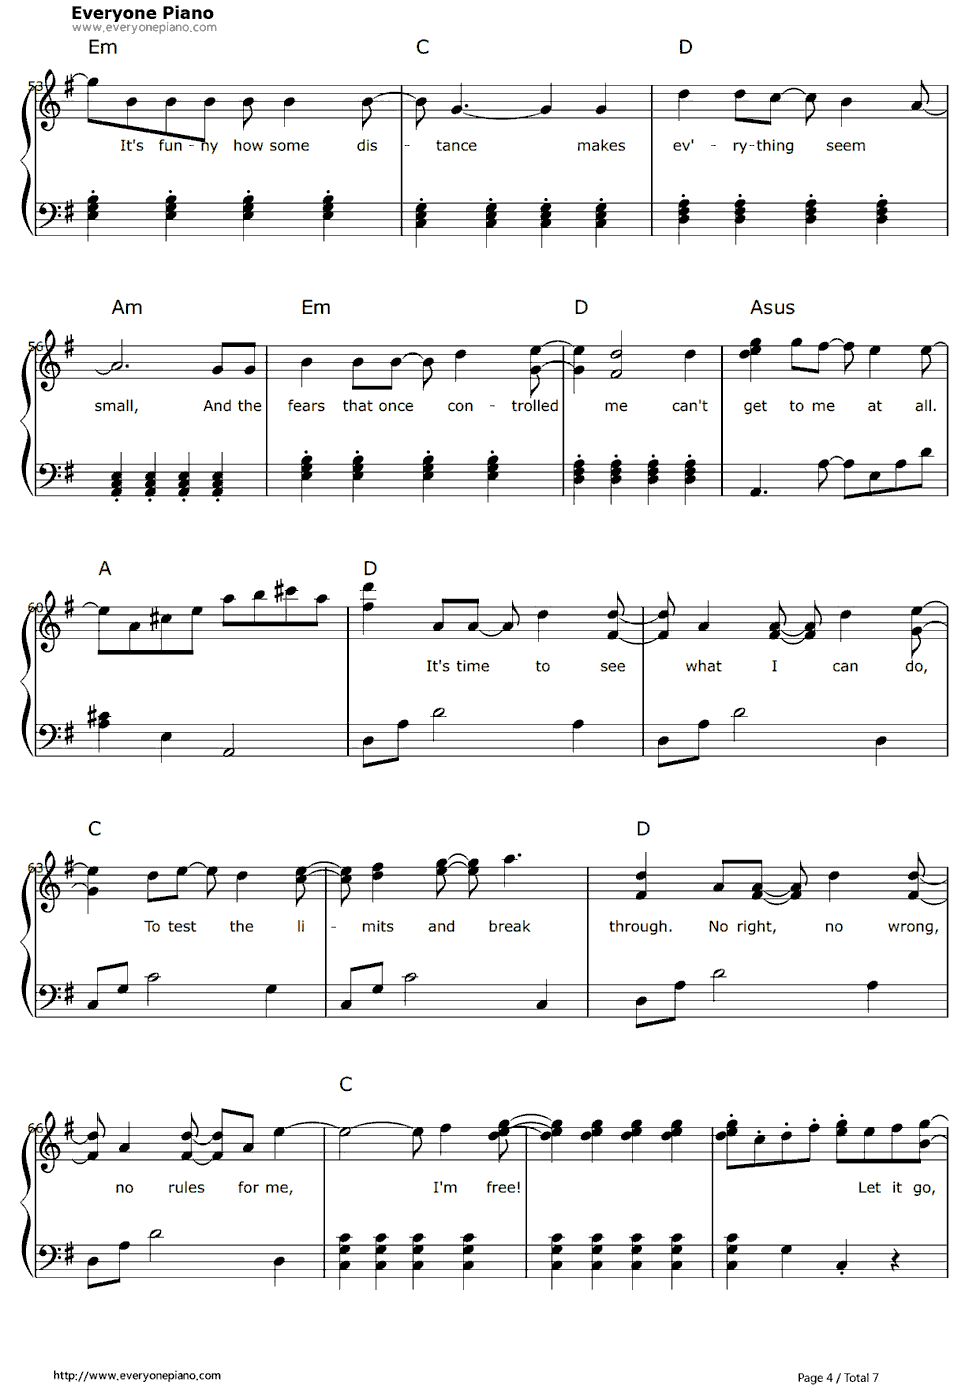 Free Let It Go Easy Version-Frozen Theme Sheet Music Preview 4 - Let It Go Piano Sheet Music Free Printable